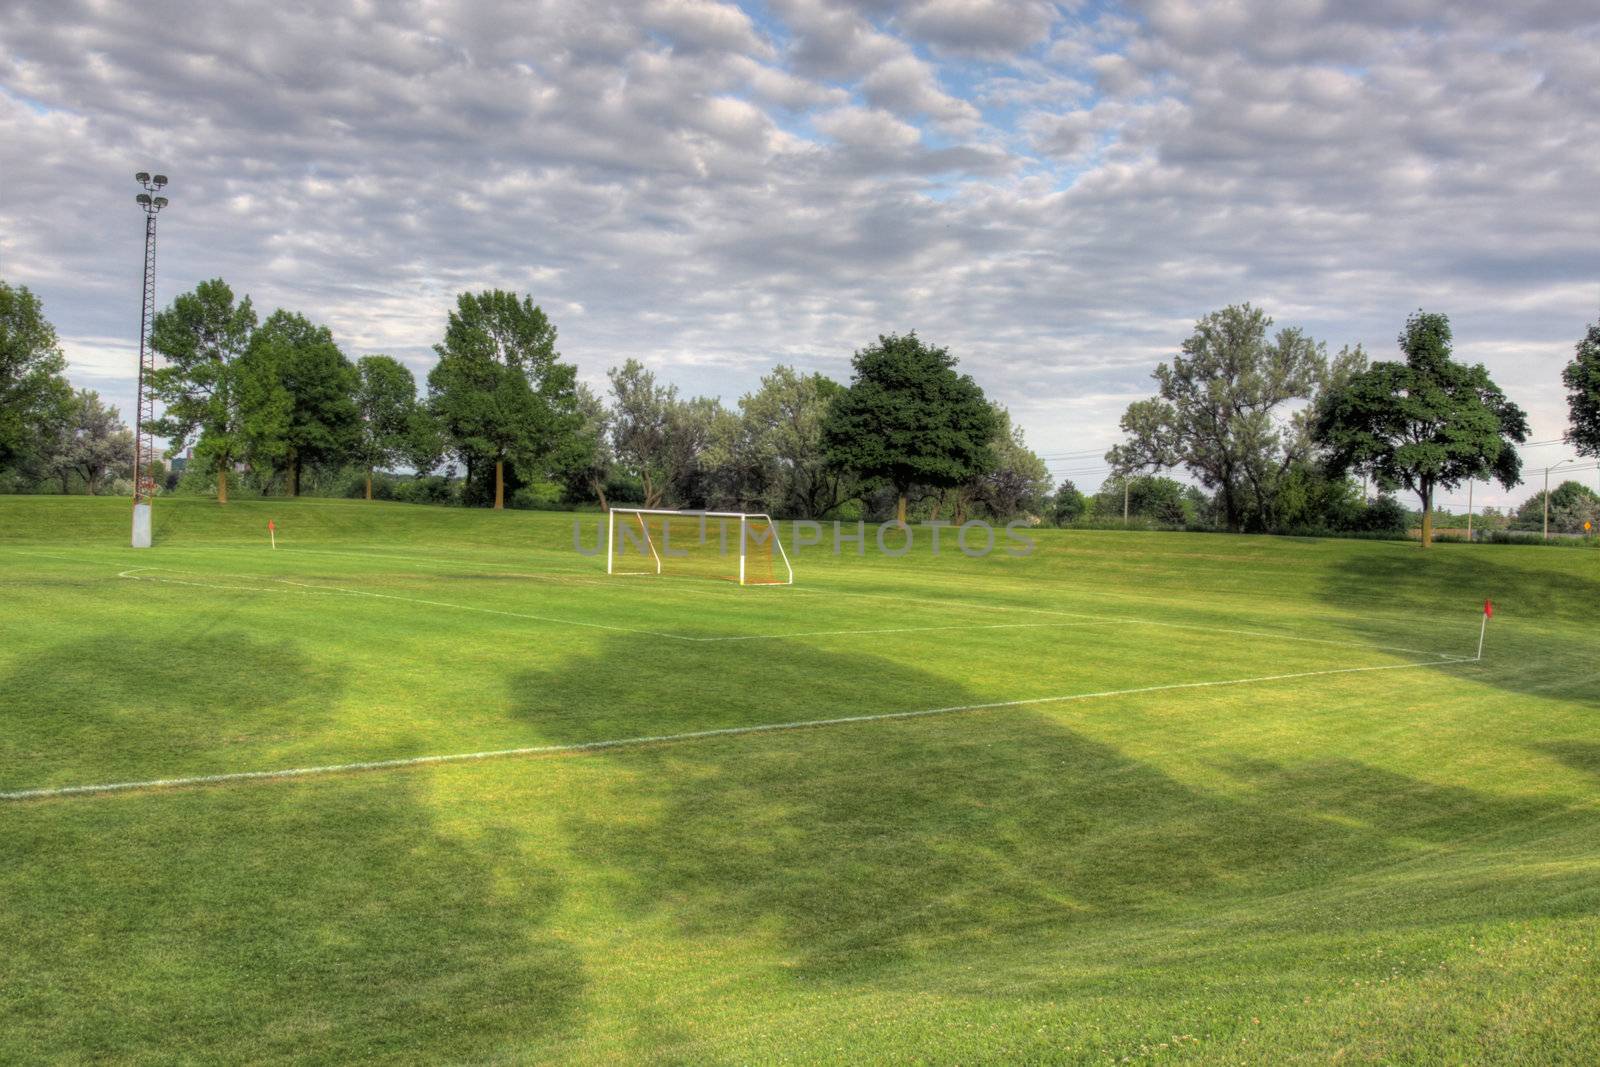 A cloudy unoccupied soccer field with trees in the background. (HDR photograph)
